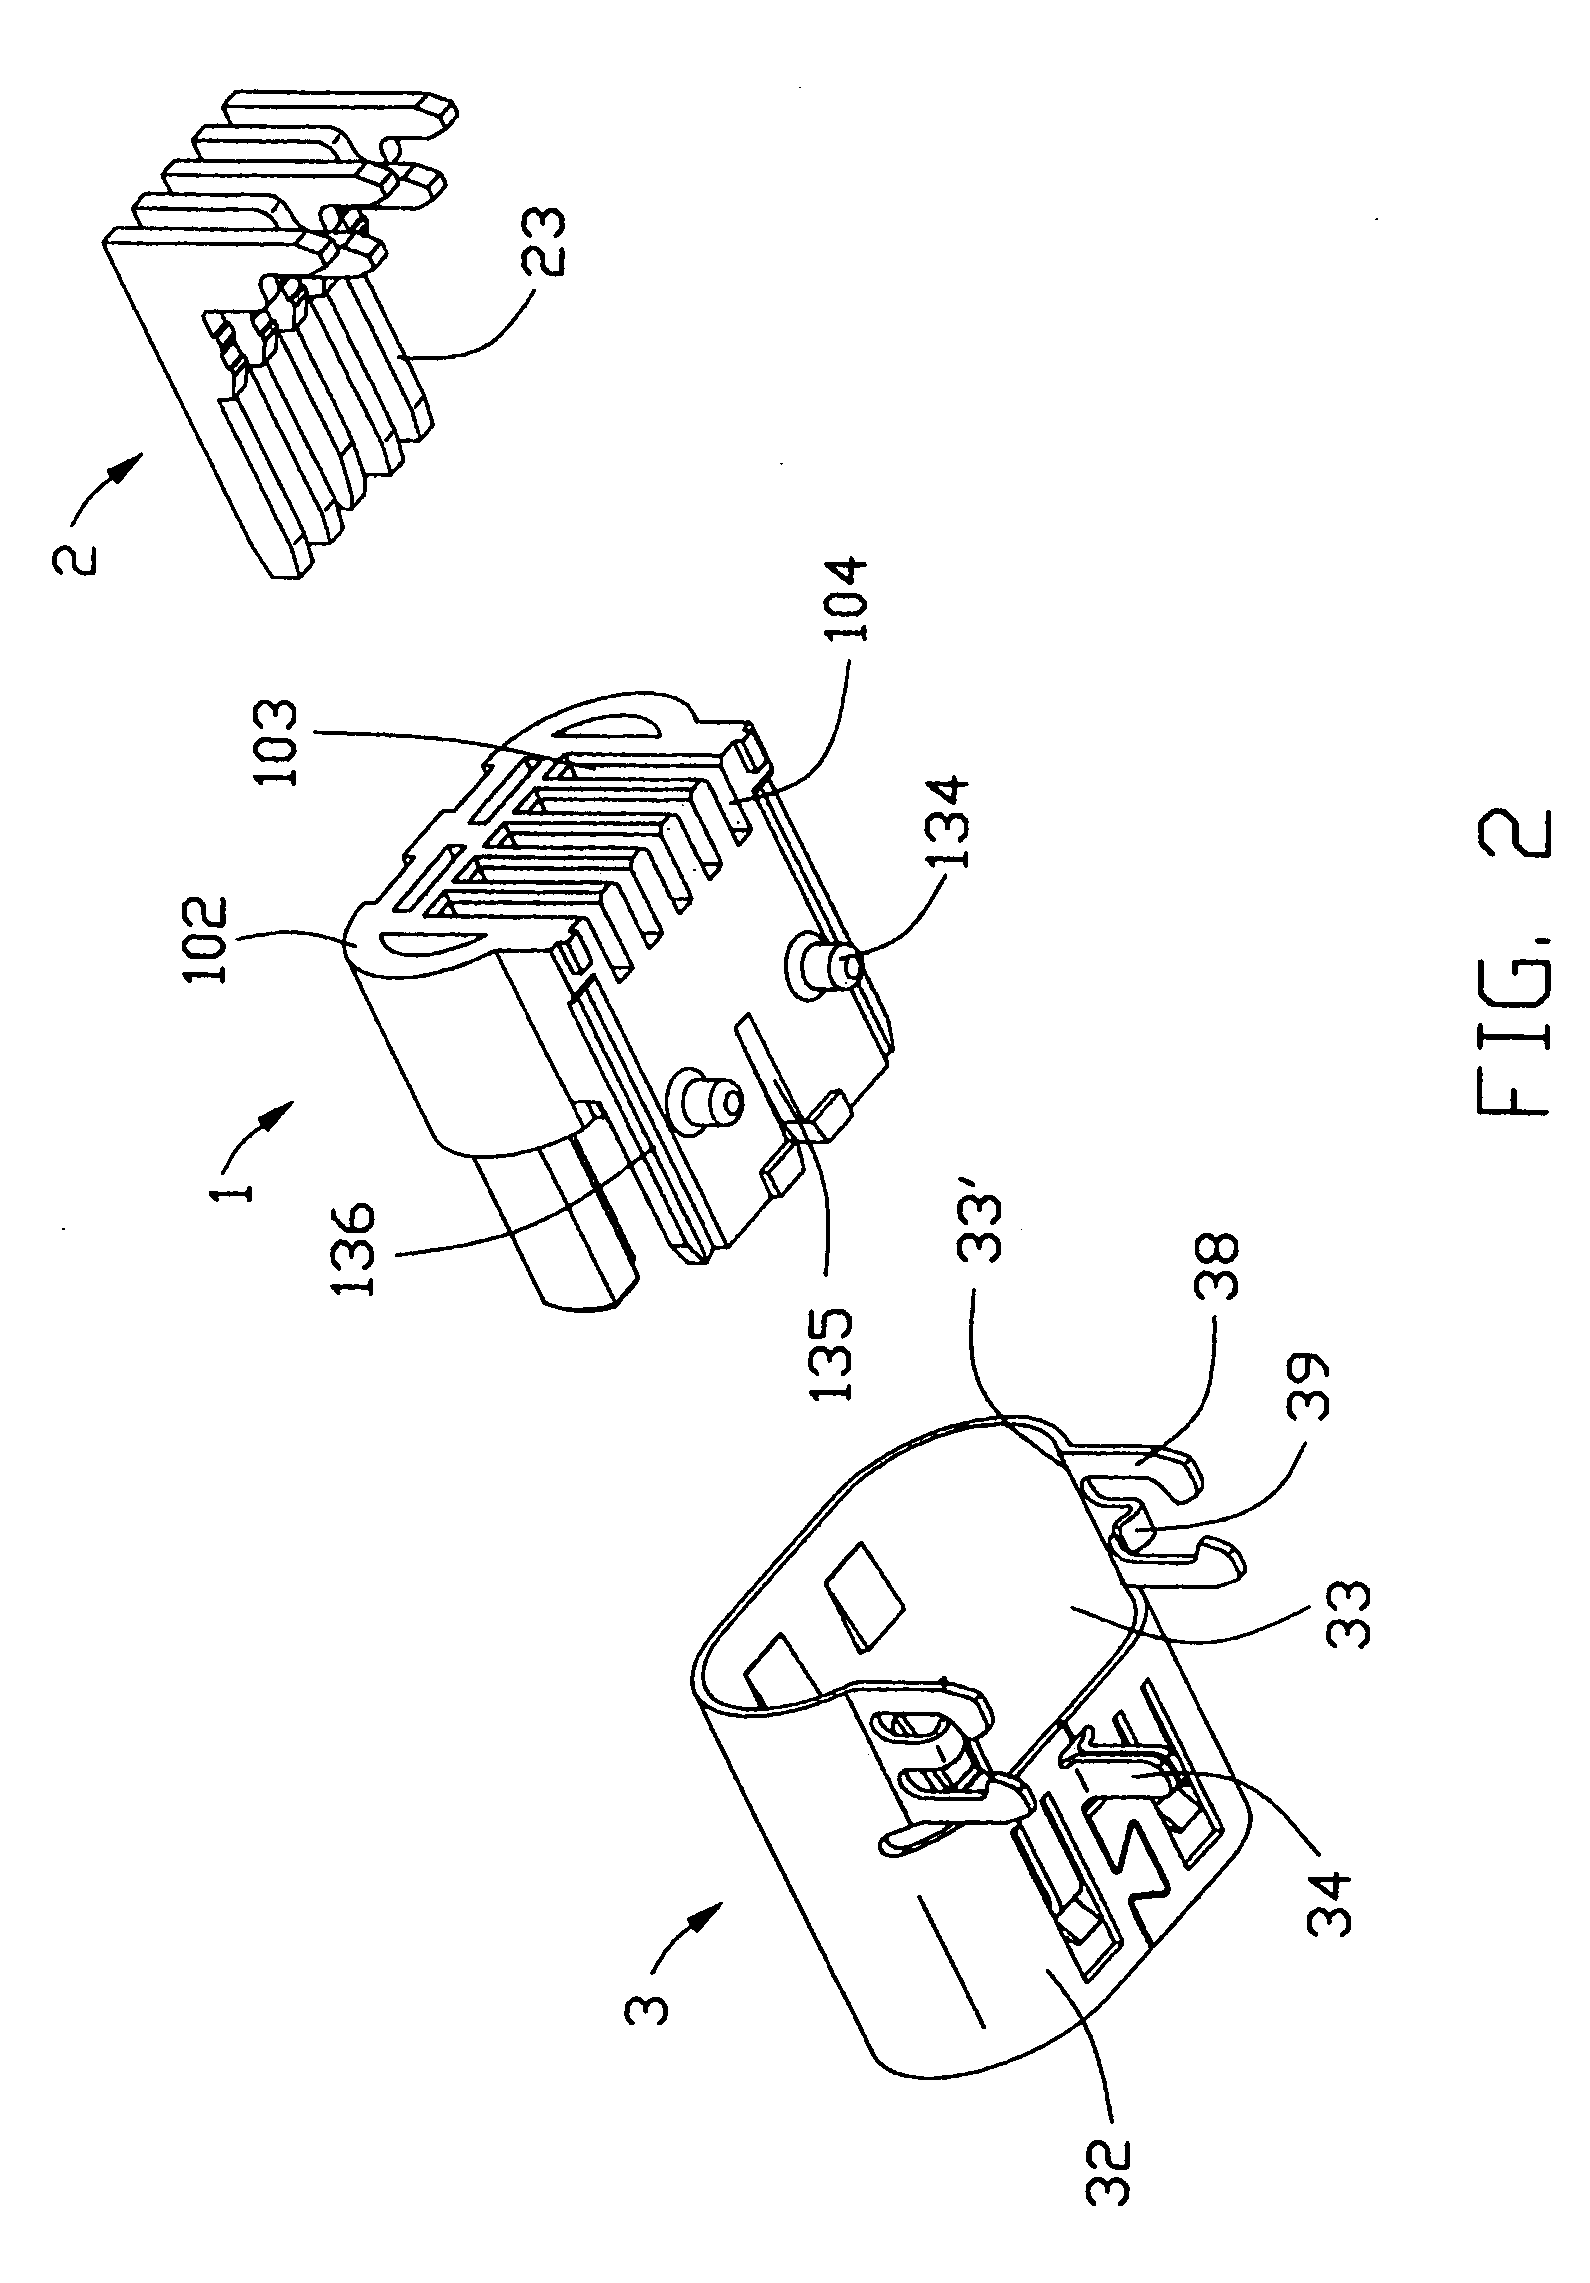 Electrical connector having structures for preventing deflected-insertion